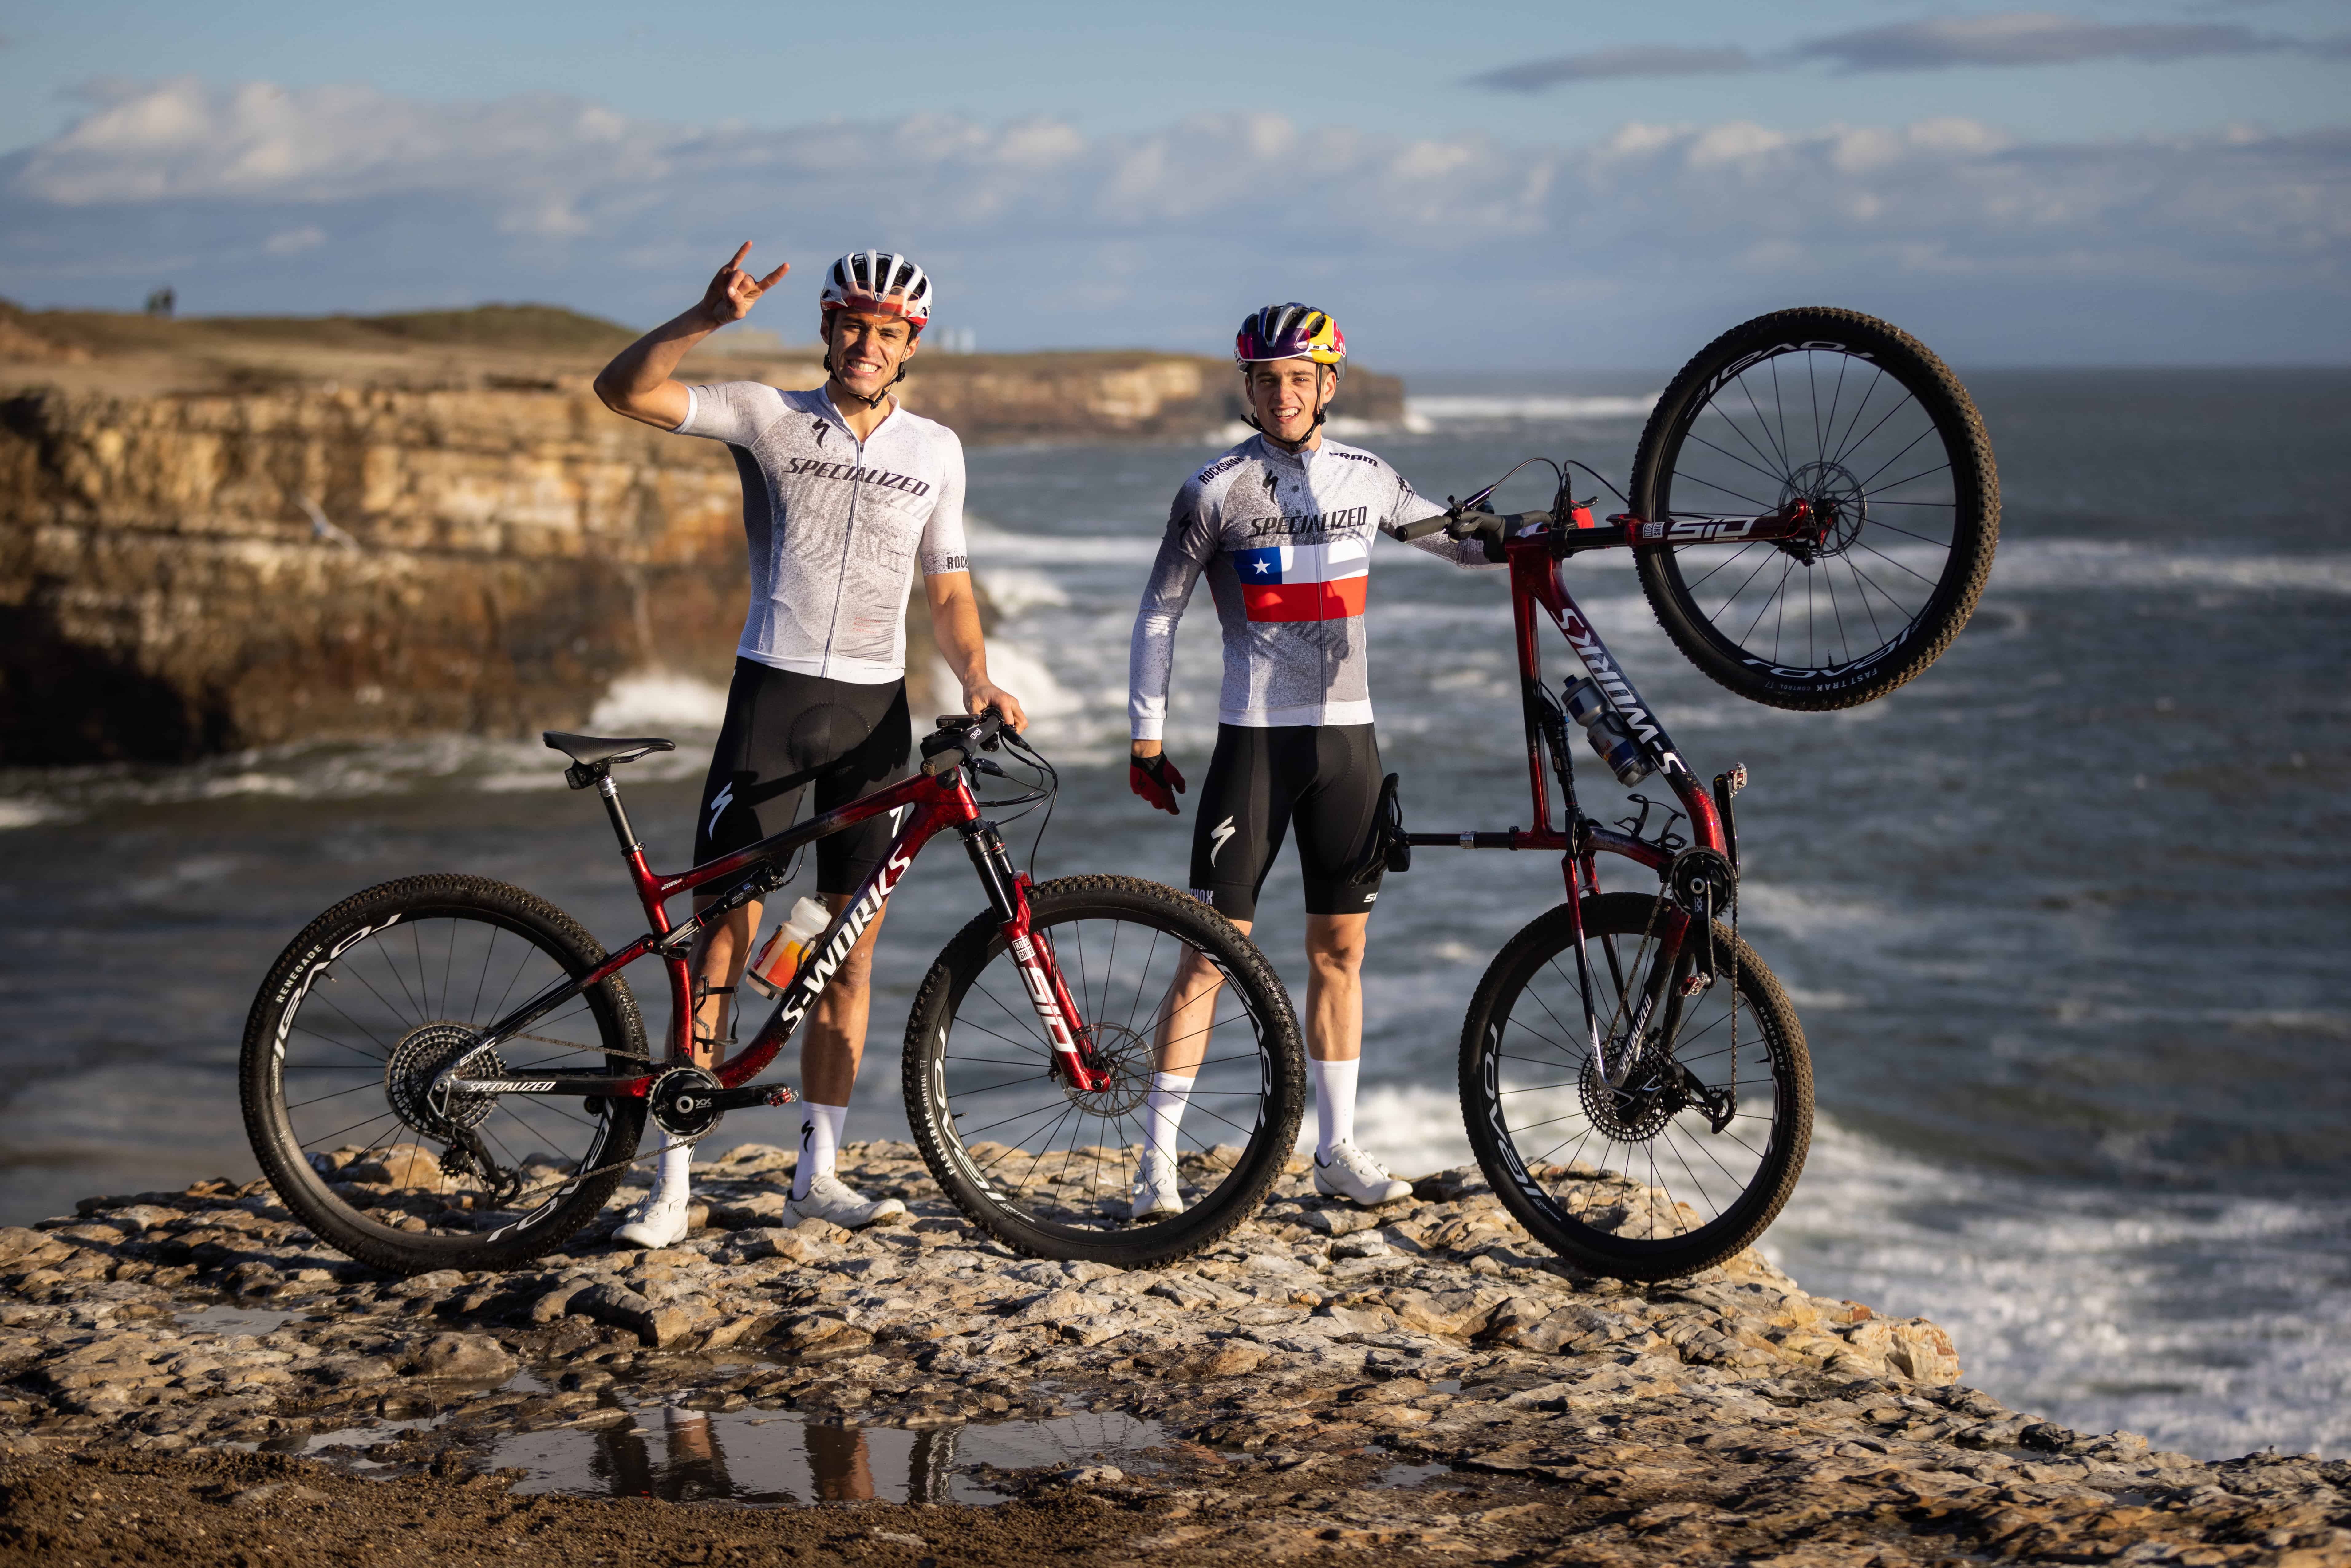 Koretzky and Vidaurre join Specialized Racing 